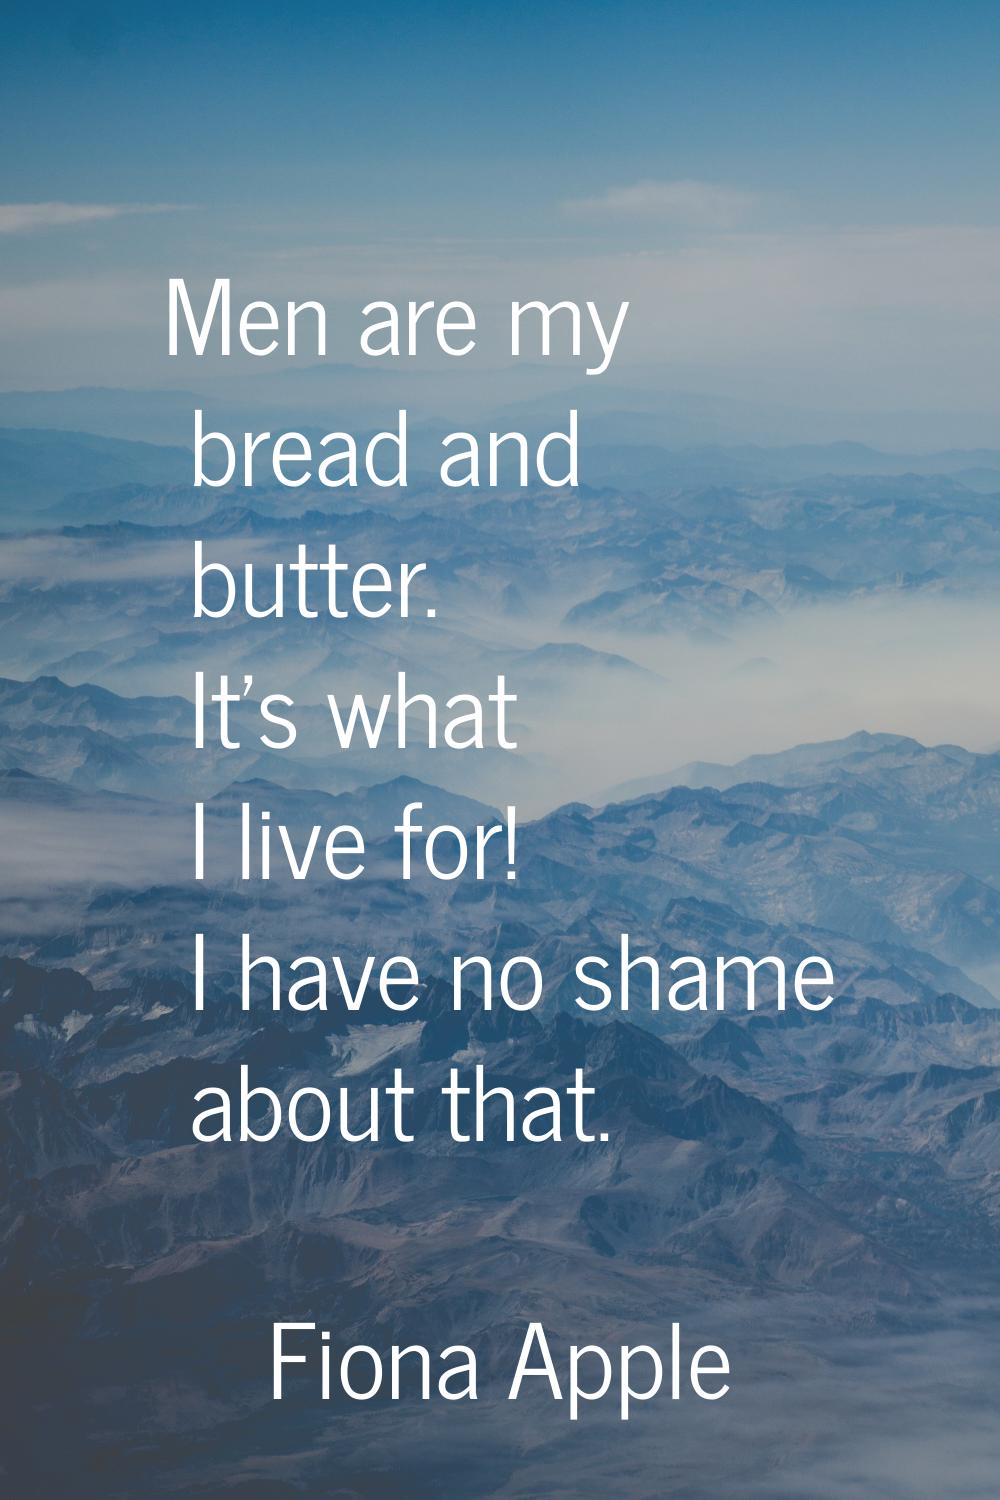 Men are my bread and butter. It's what I live for! I have no shame about that.